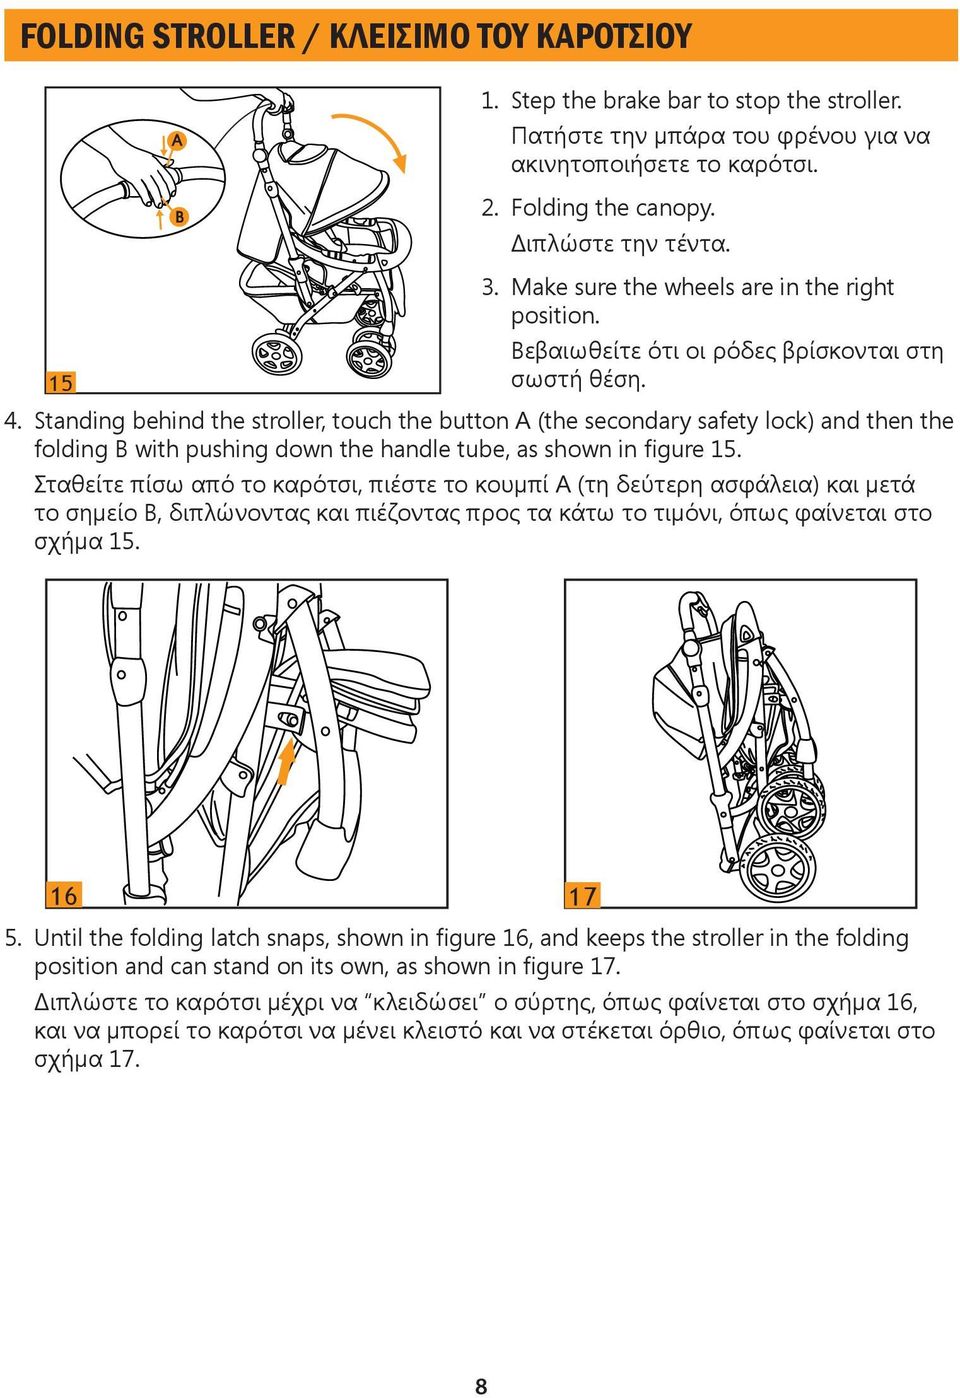 Standing behind the stroller, touch the button A (the secondary safety lock) and then the folding B with pushing down the handle tube, as shown in figure 15.